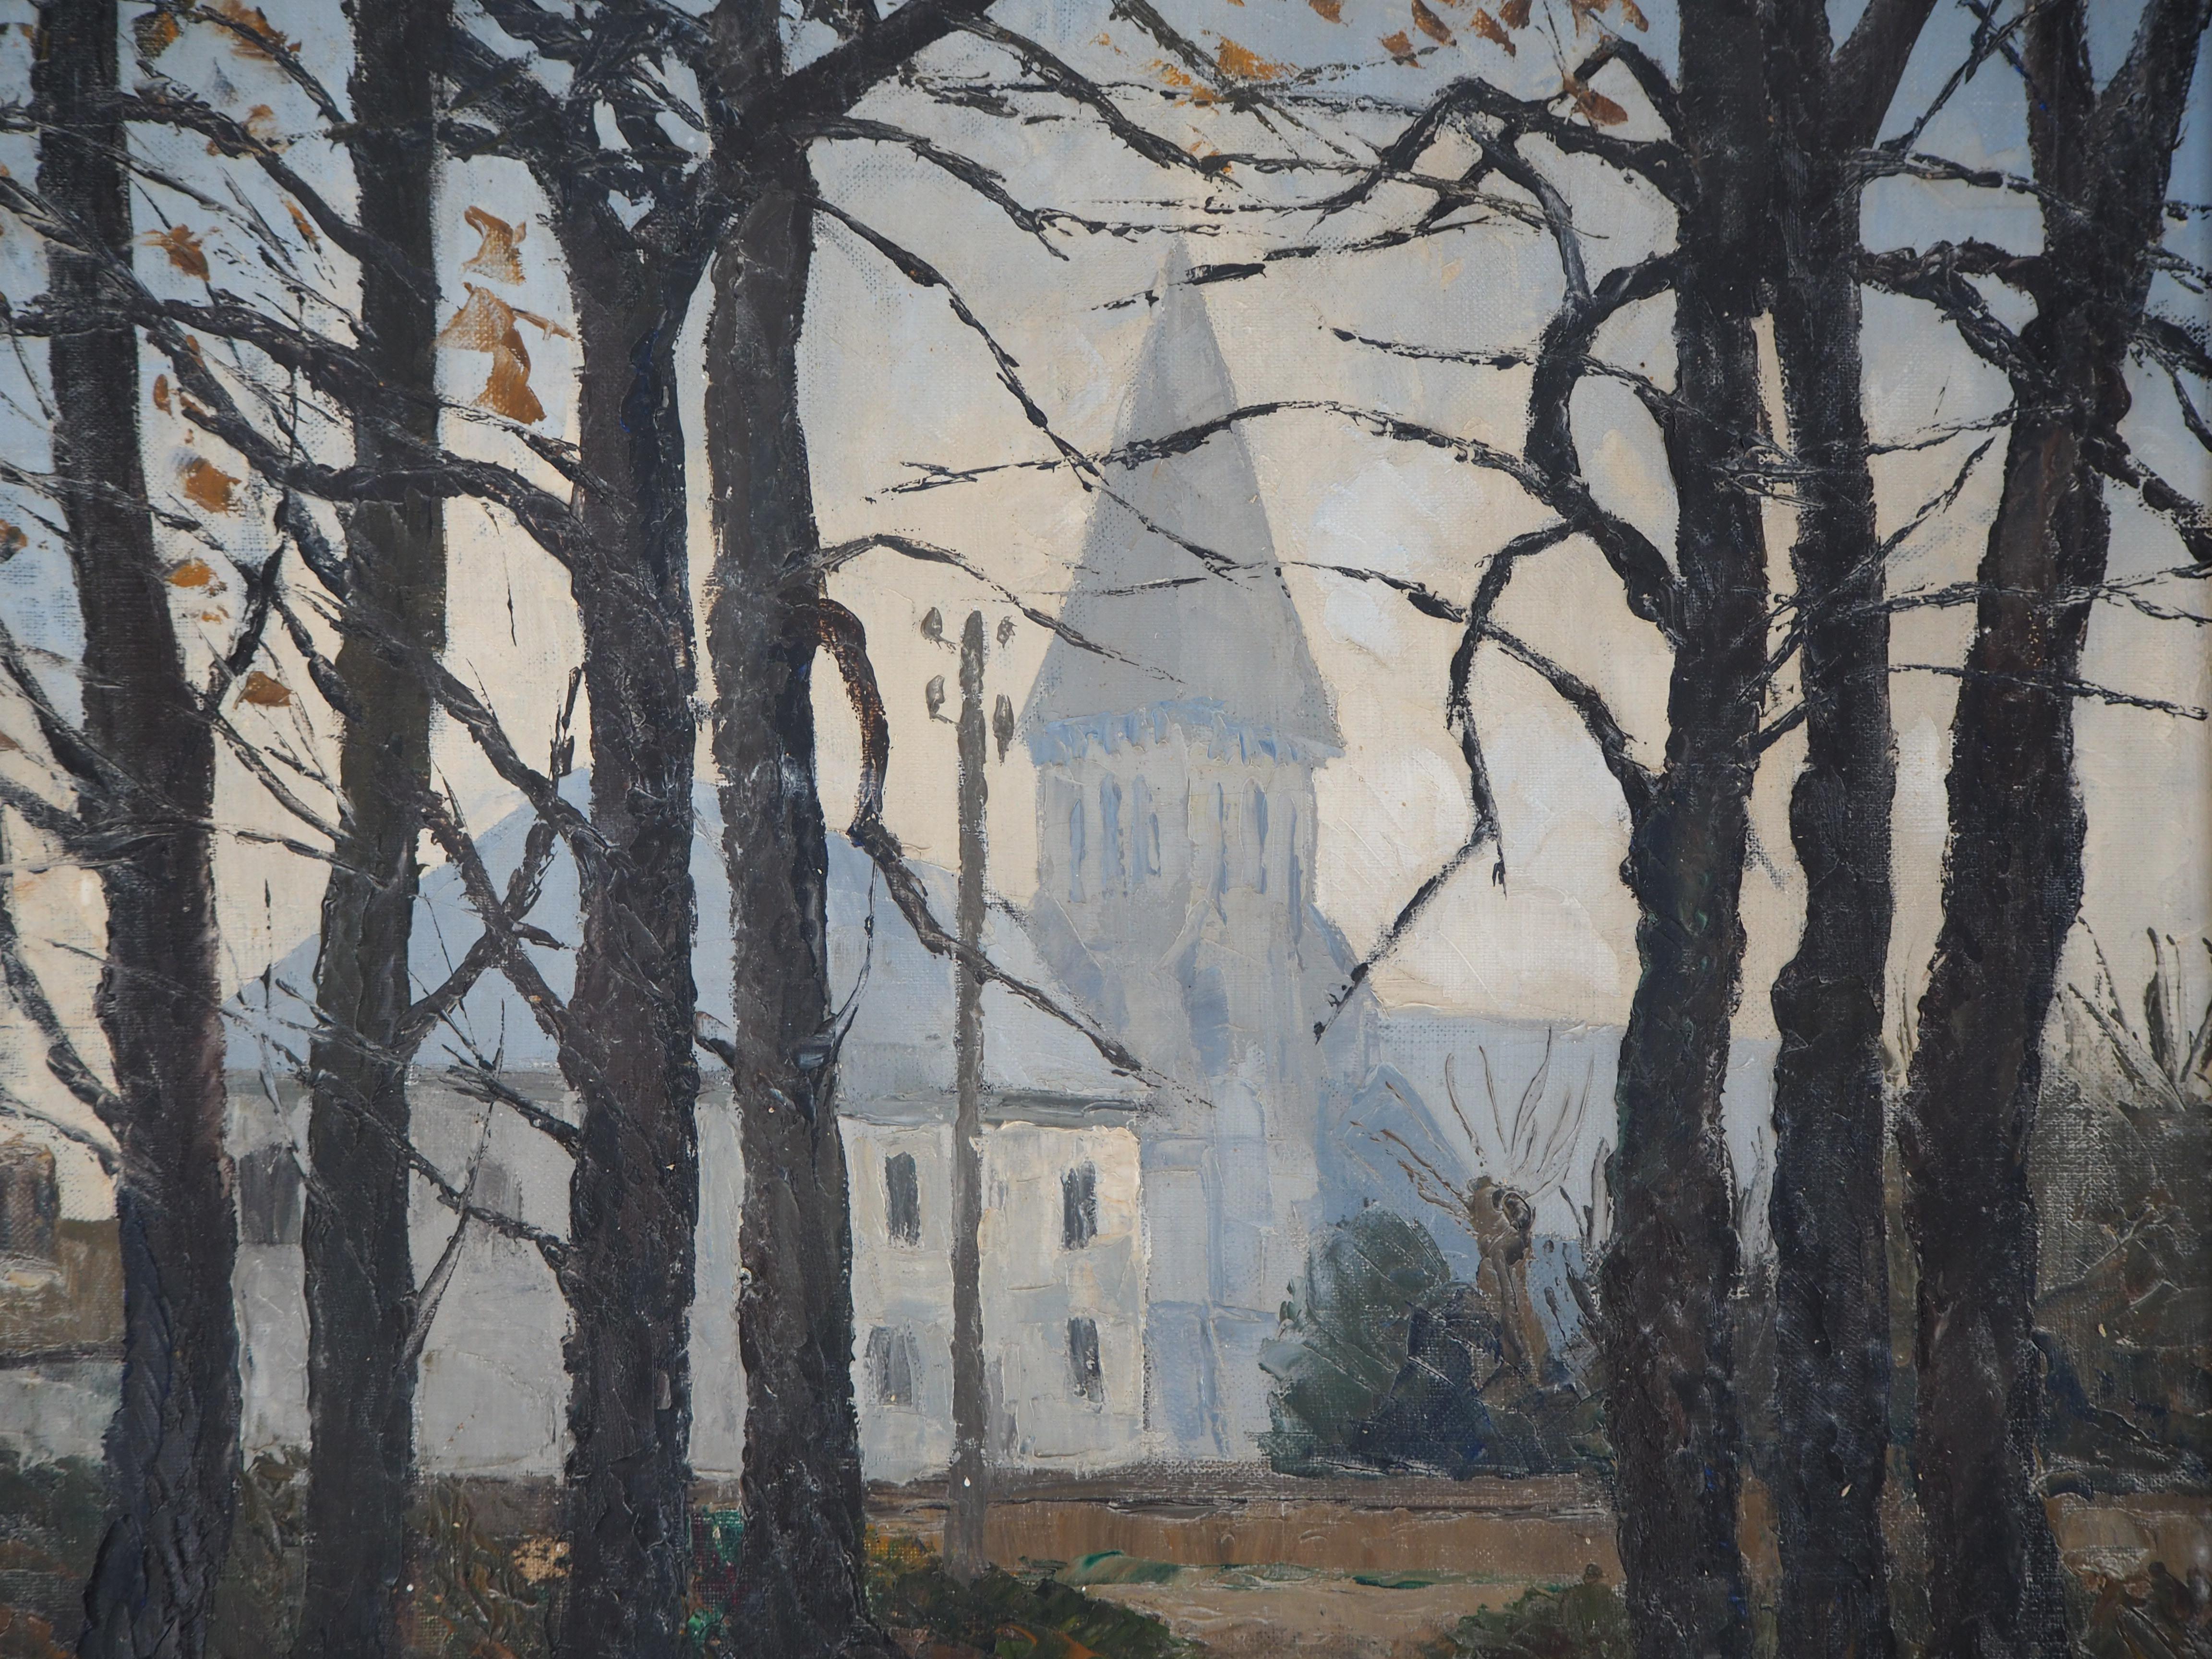 Paul Emile PISSARRO
Normandy : Church of St Denis

Original oil on canvas
Hansigned bottom left
(Signed again and titled on the back)
On canvas 46 x 61 cm (c. 18 x 24 inch)
Presented in wood frame 60 x 75 cm (c. 24 x 30 inch)

Excellent condition,